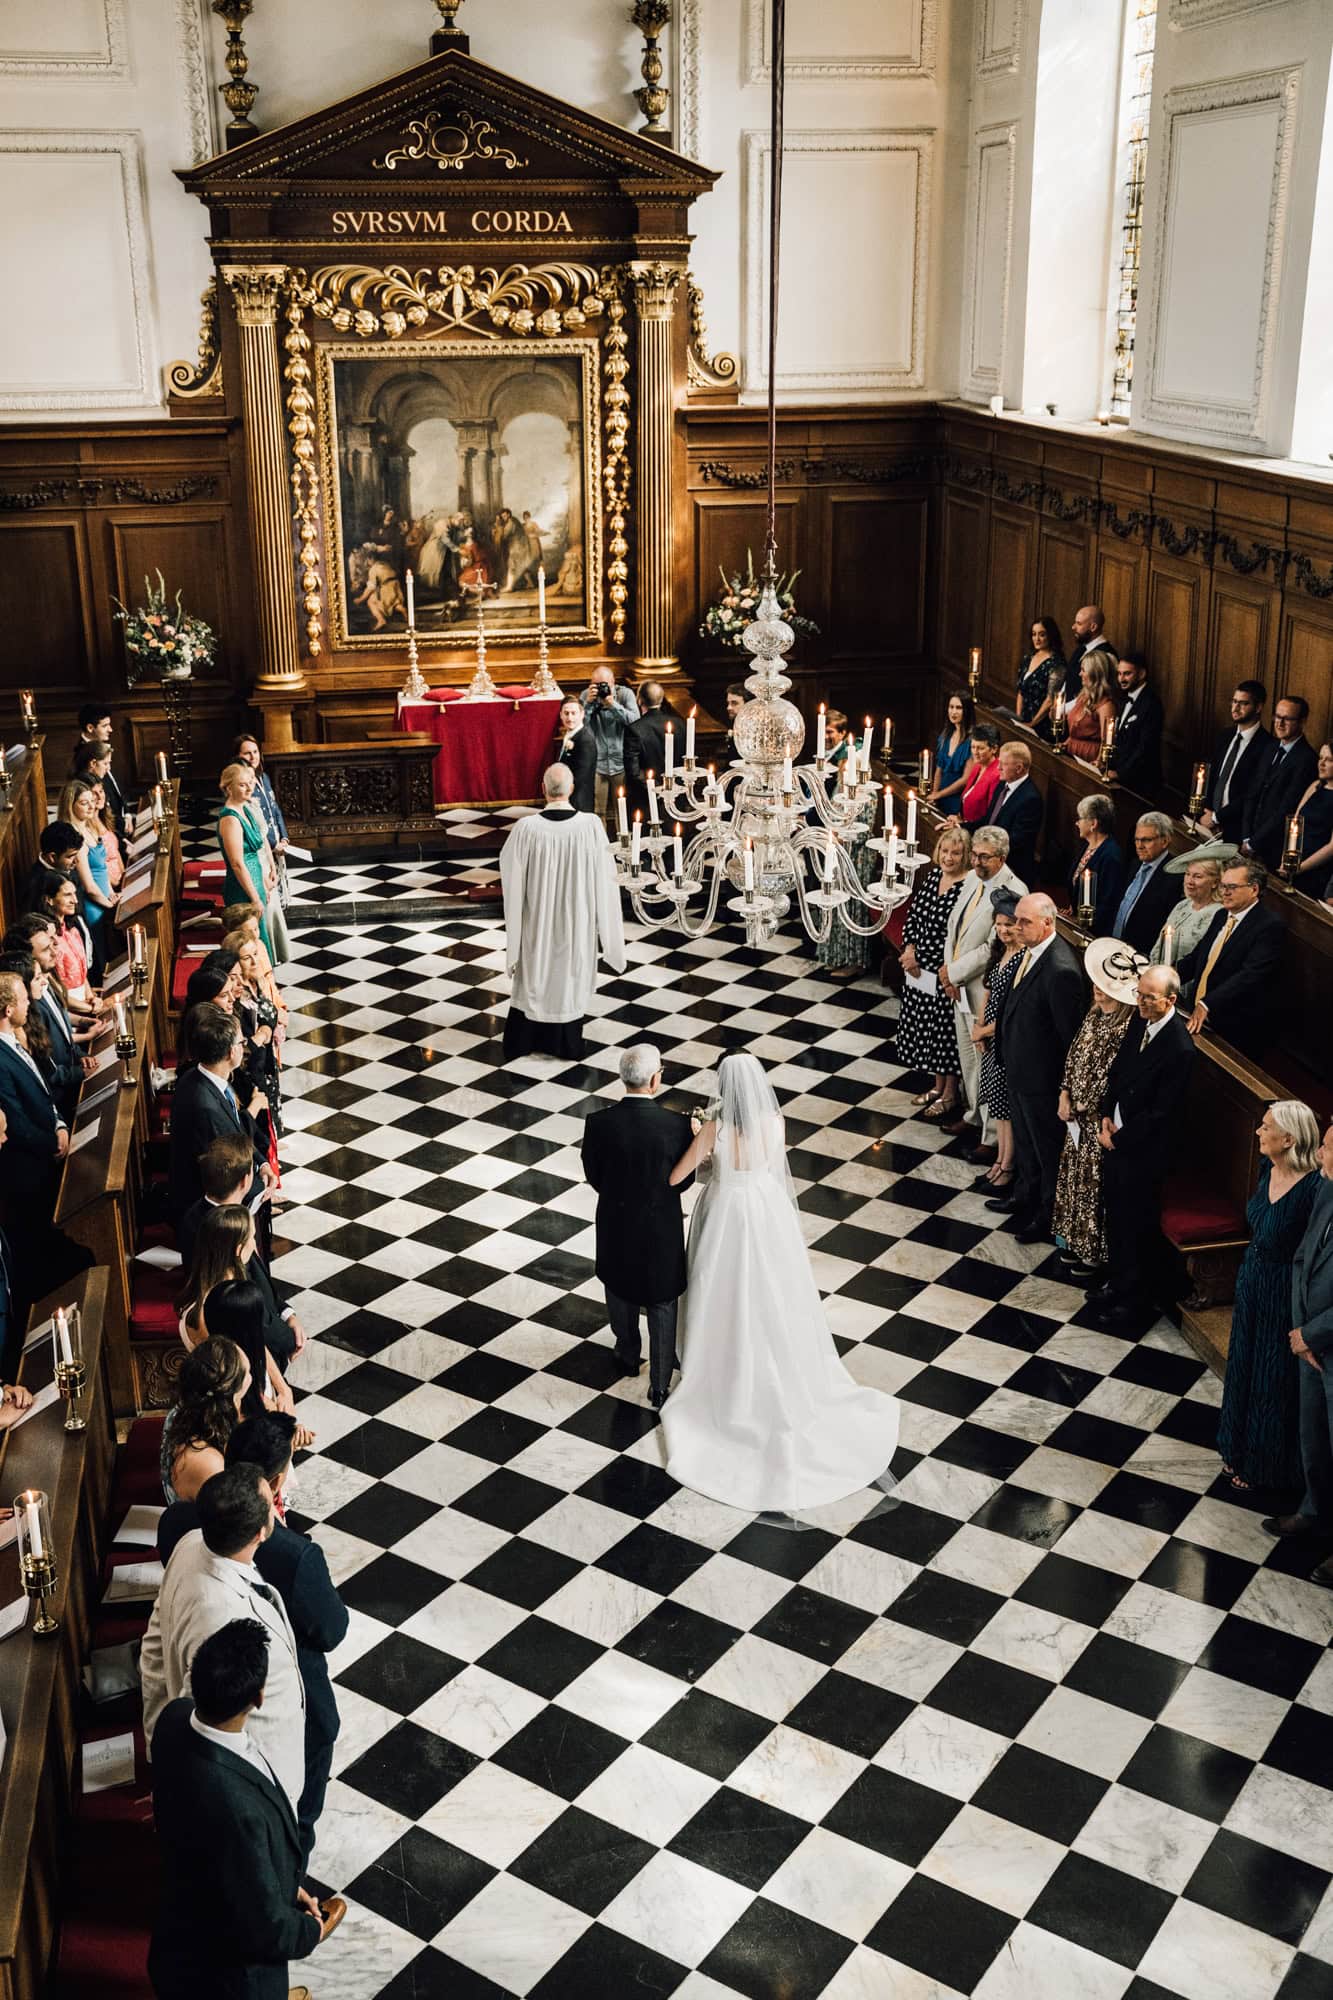 Wedding ceremony in the grand setting of the chapel at Emmanuel College in Cambridge